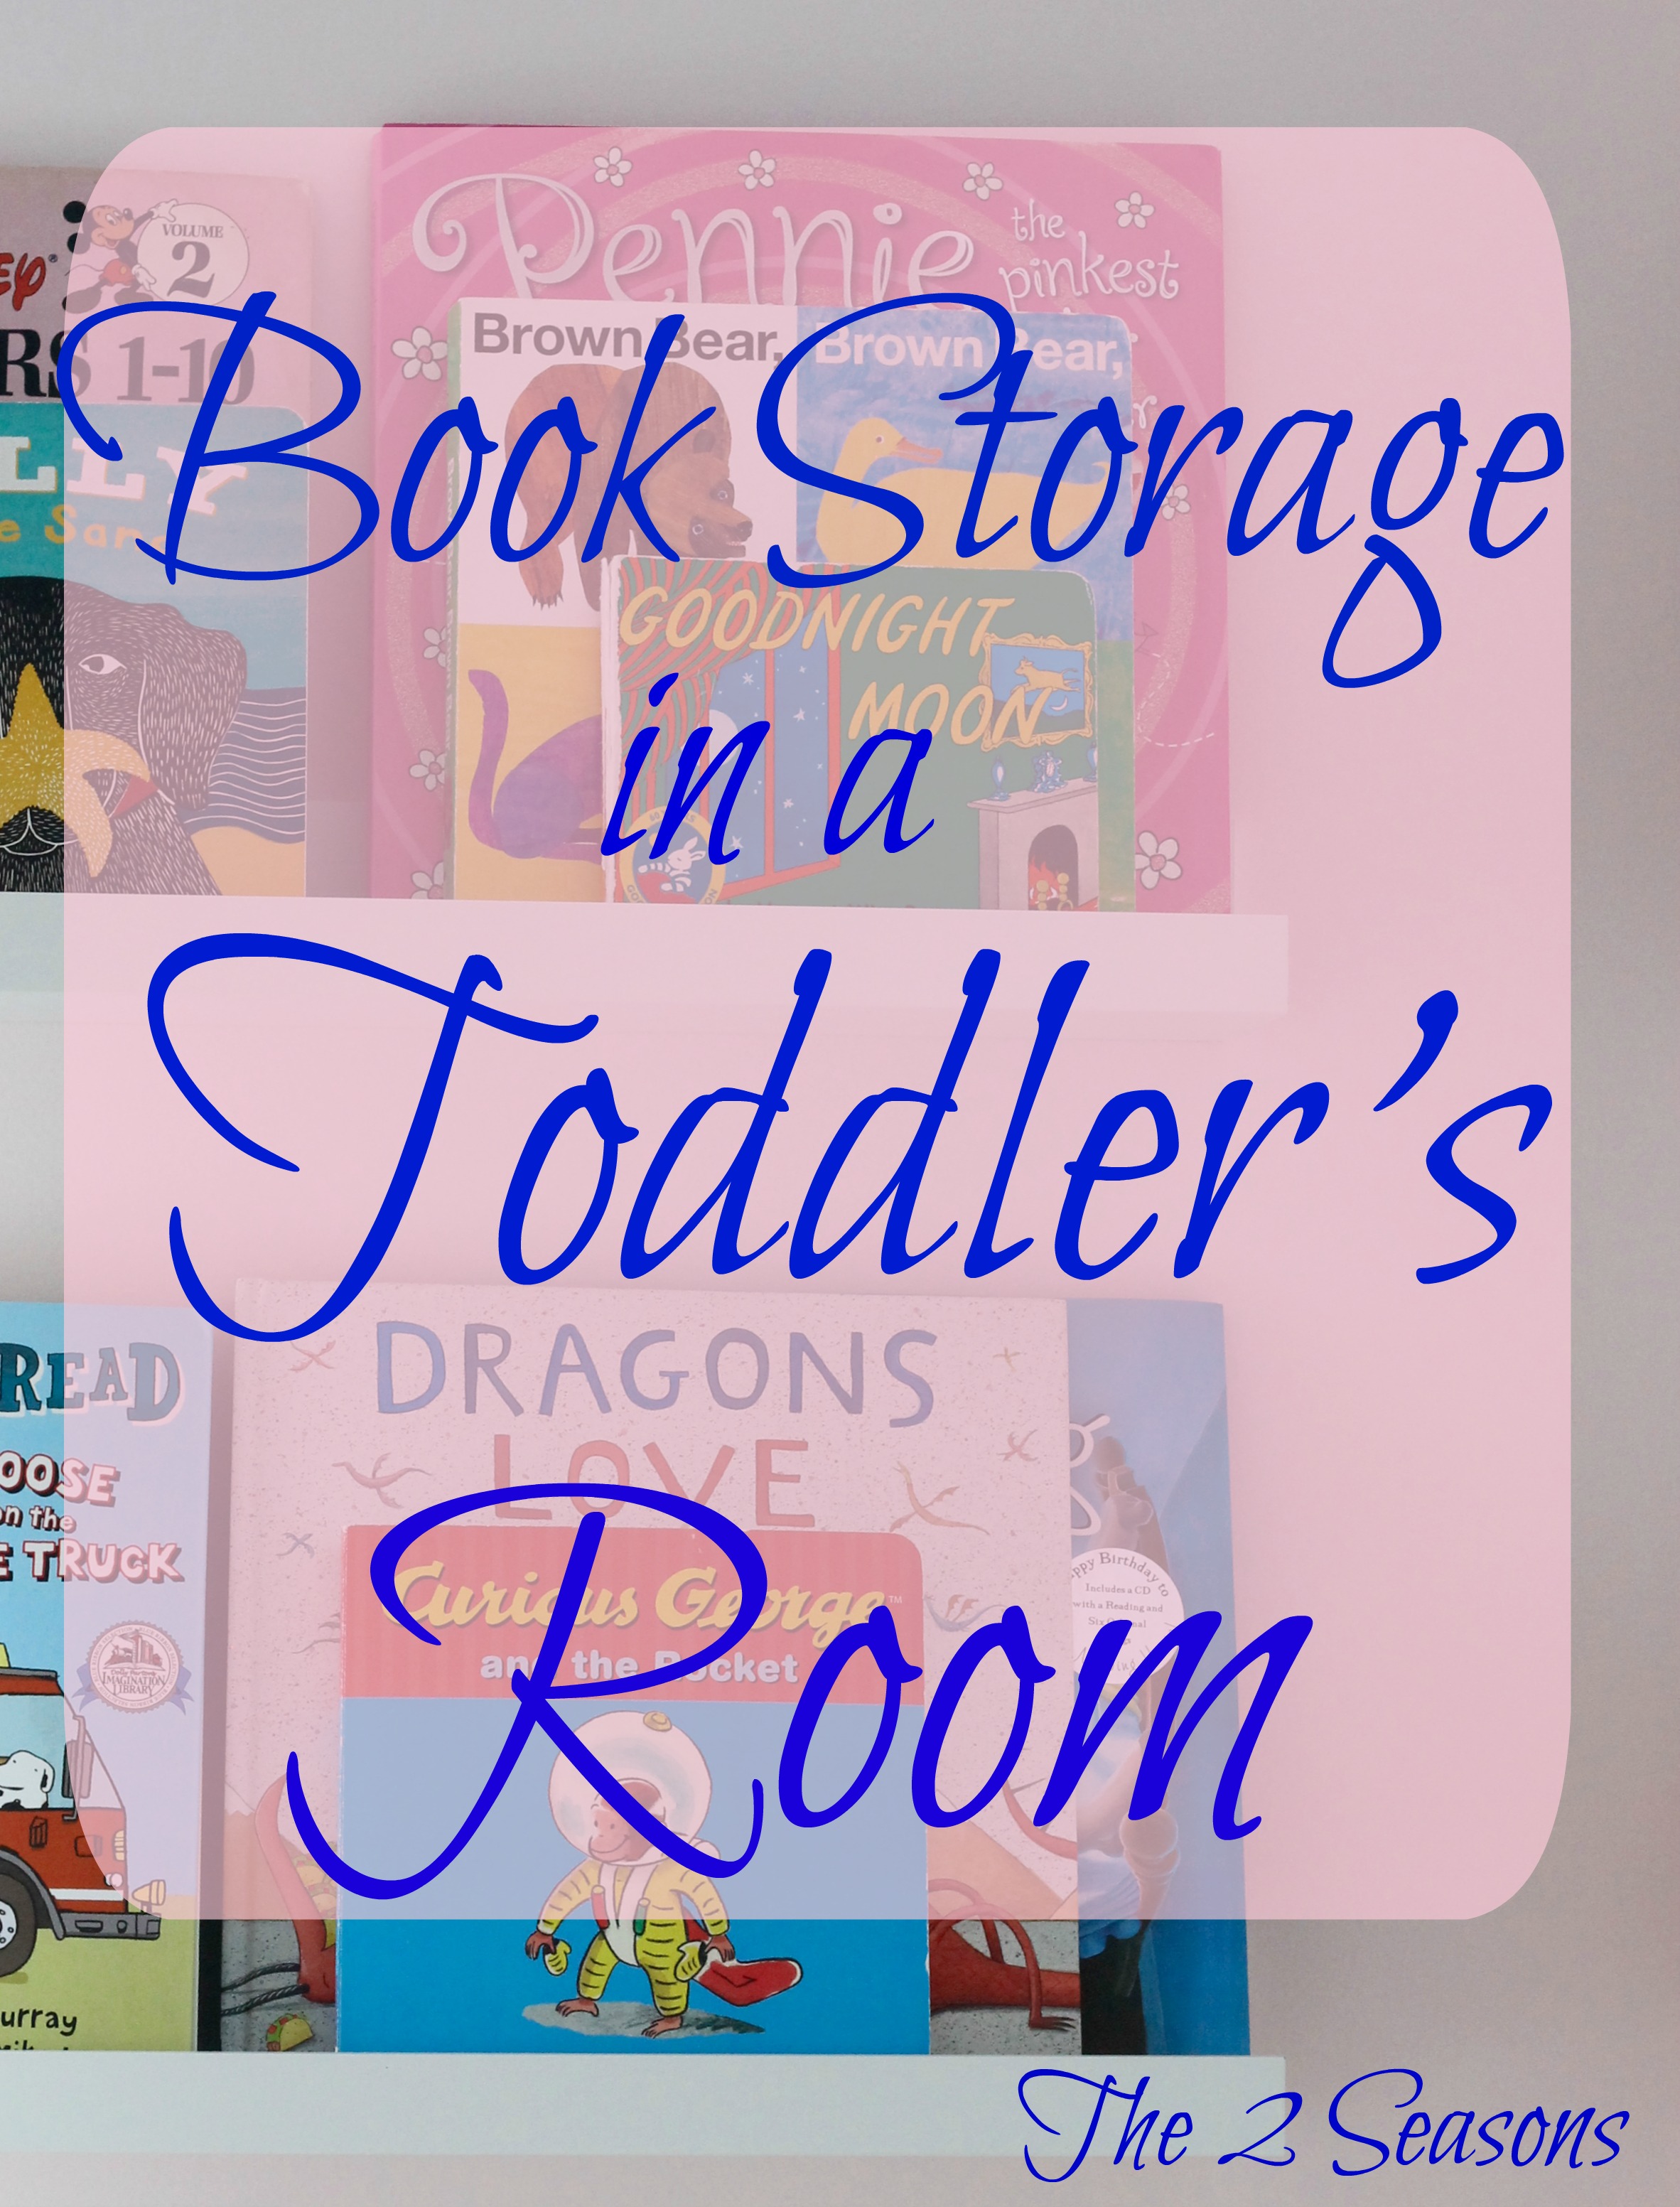 Book Storage in a Toddlers Room - Book Storage in a Toddler's Room